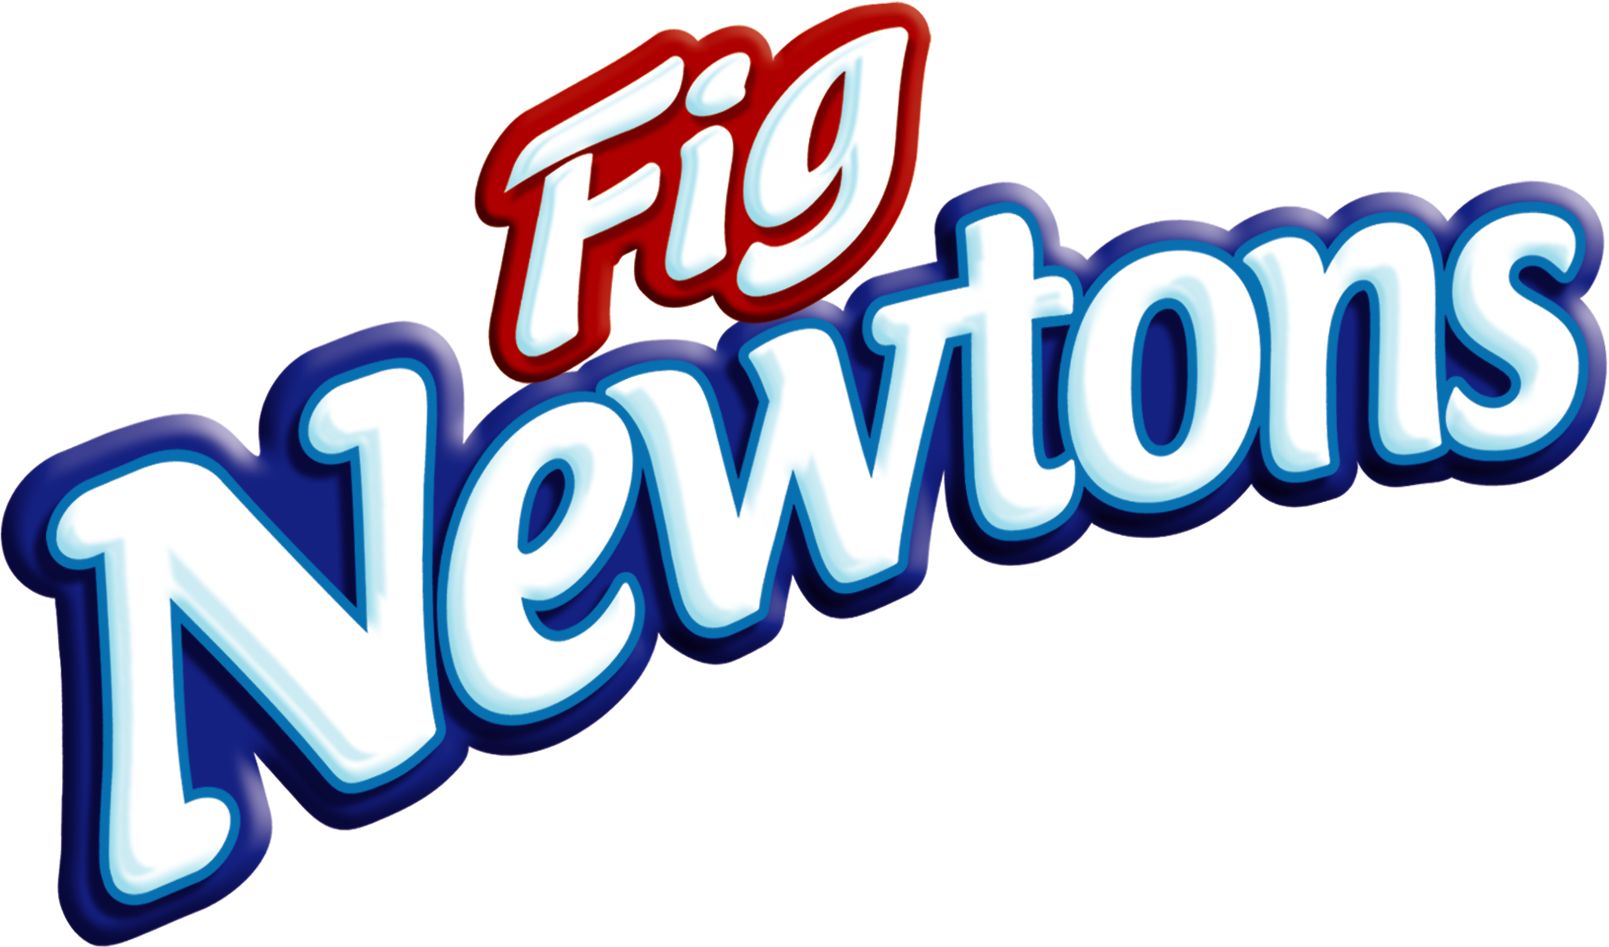 whats a fig newton